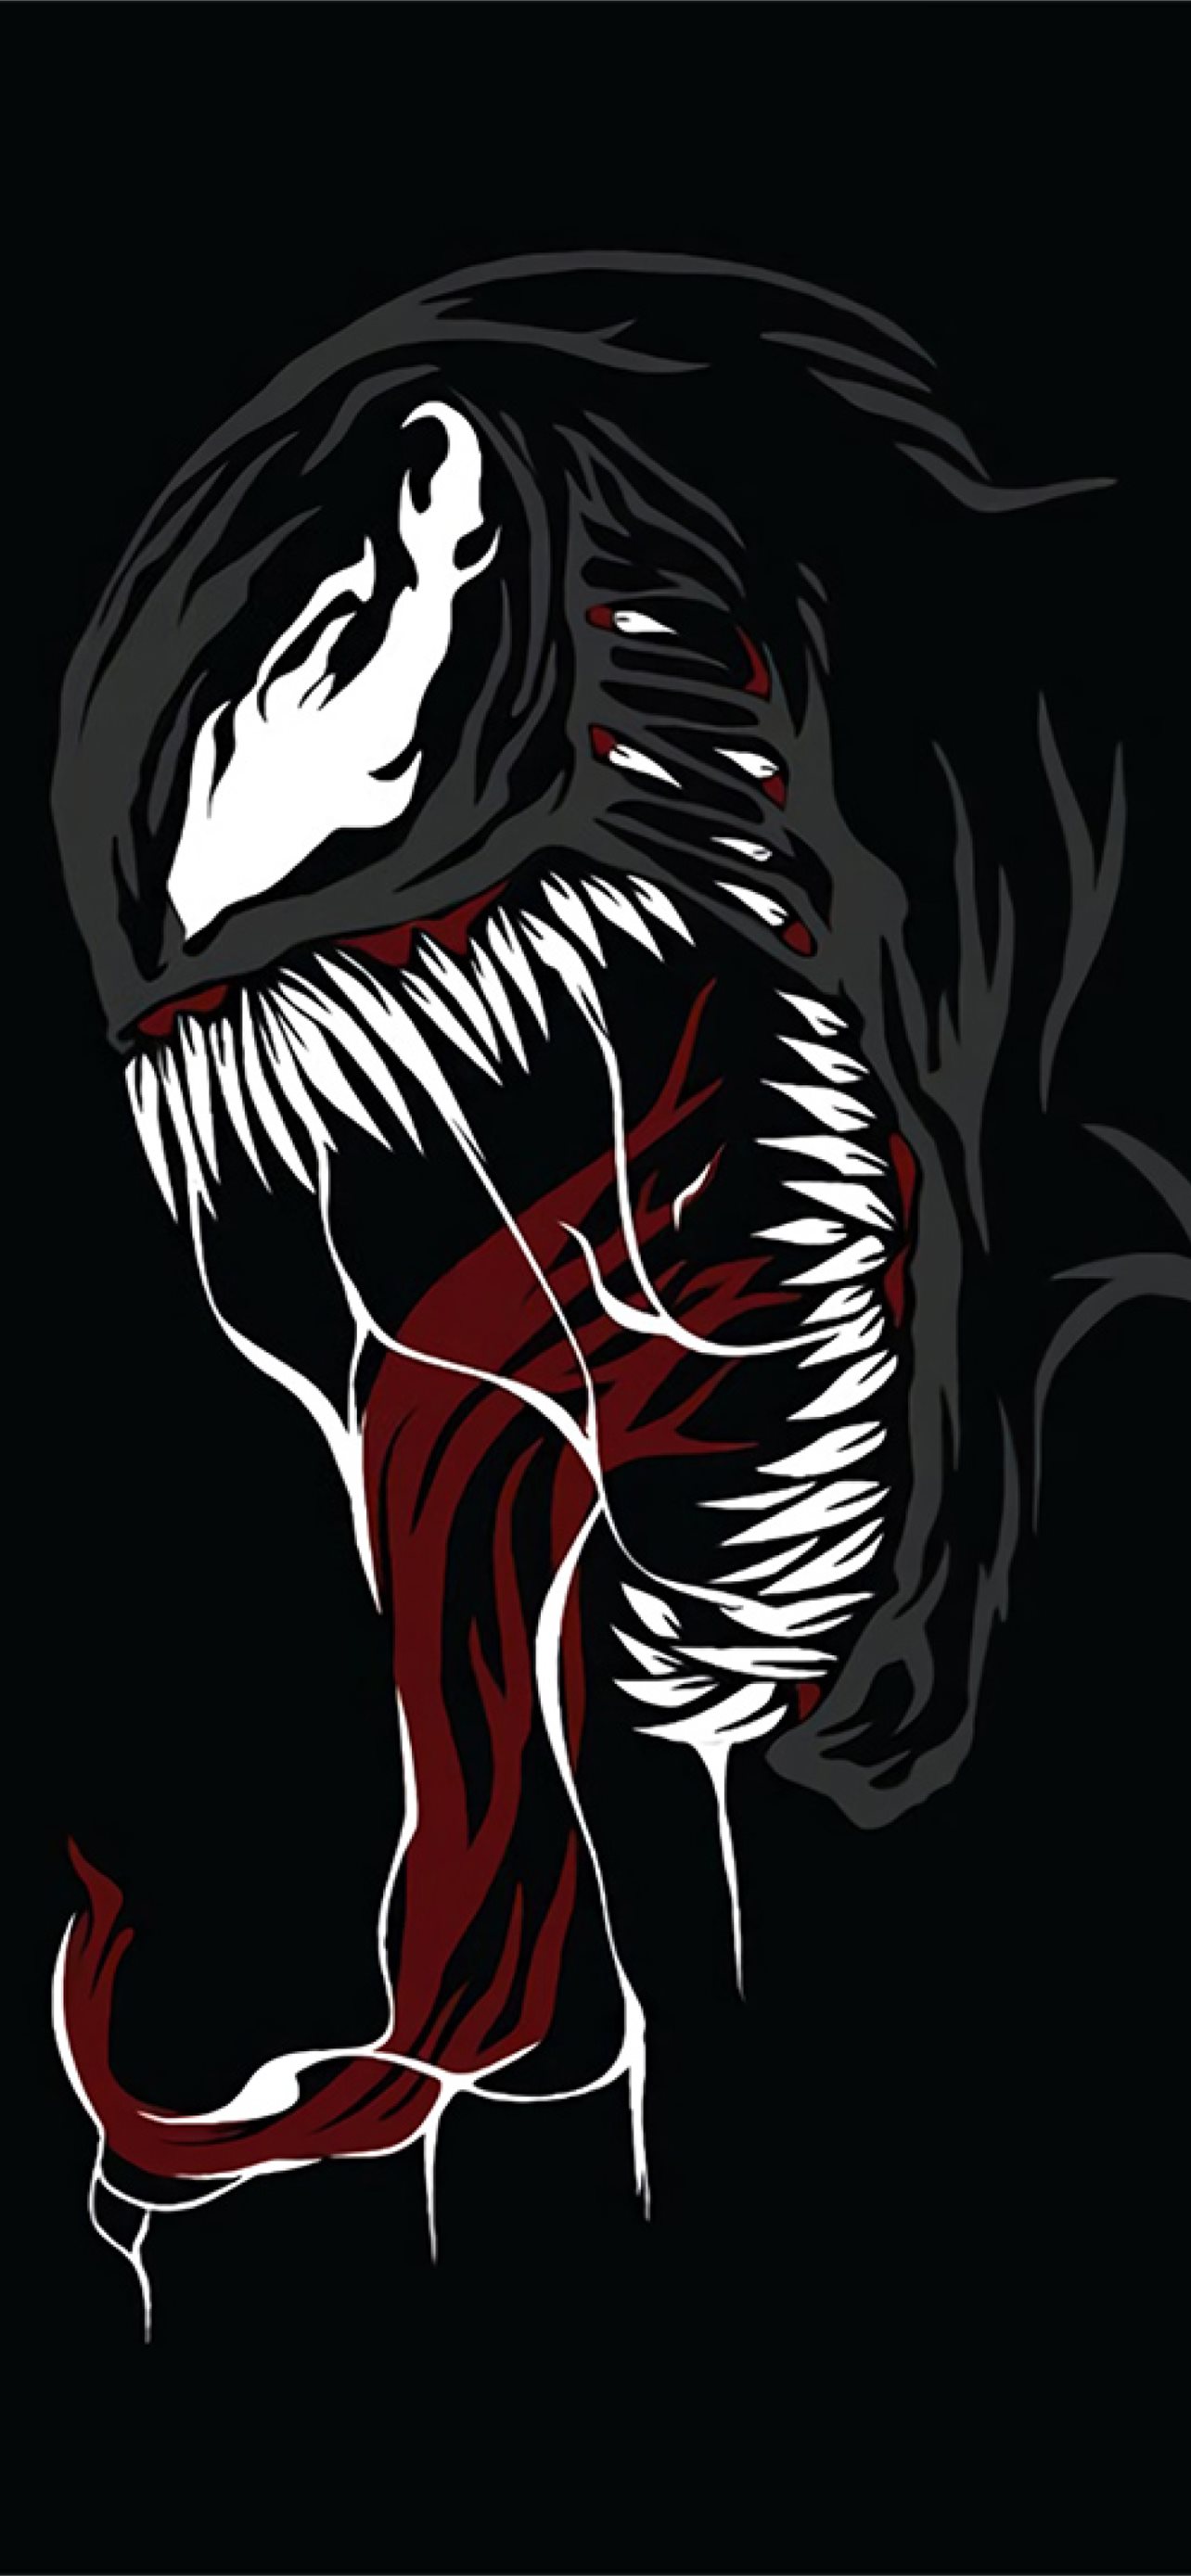 Venom Minimal Samsung Galaxy Note 9 8 S9 S8 S8 QHD... iPhone Wallpapers  Free Download